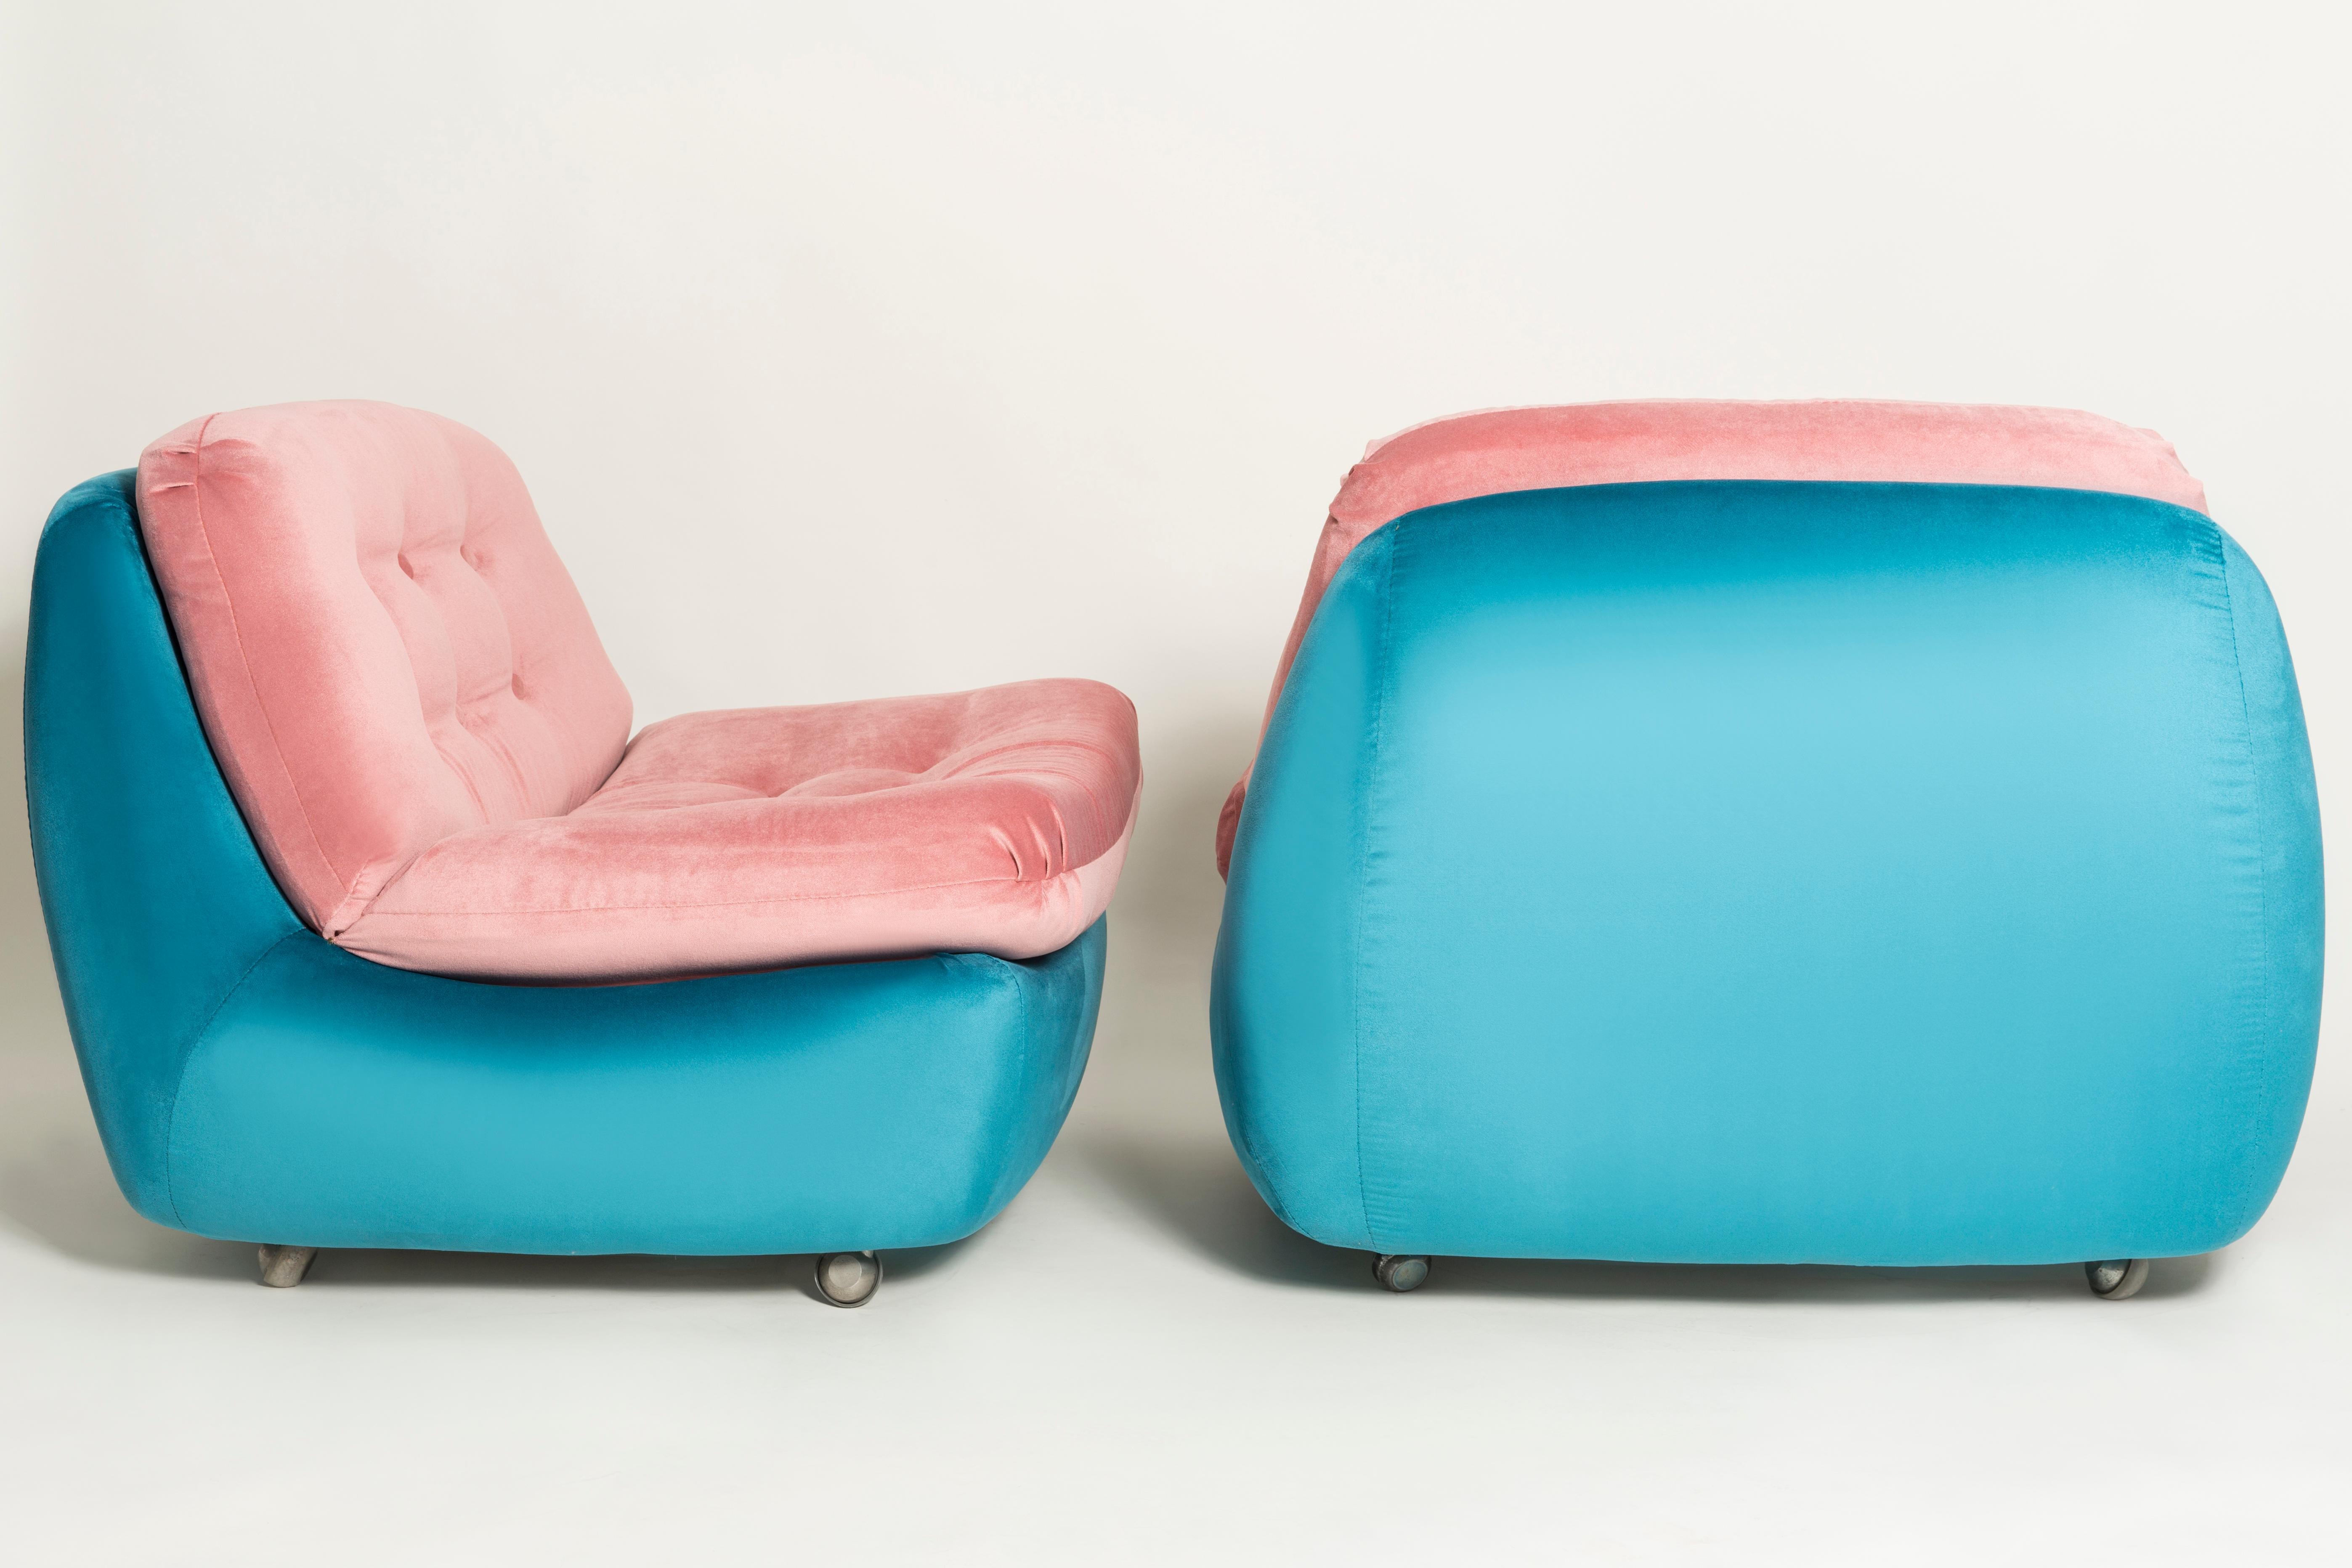 Polish Set of Two 20th Century Vintage Pink and Blue Atlantis Armchairs, 1960s For Sale